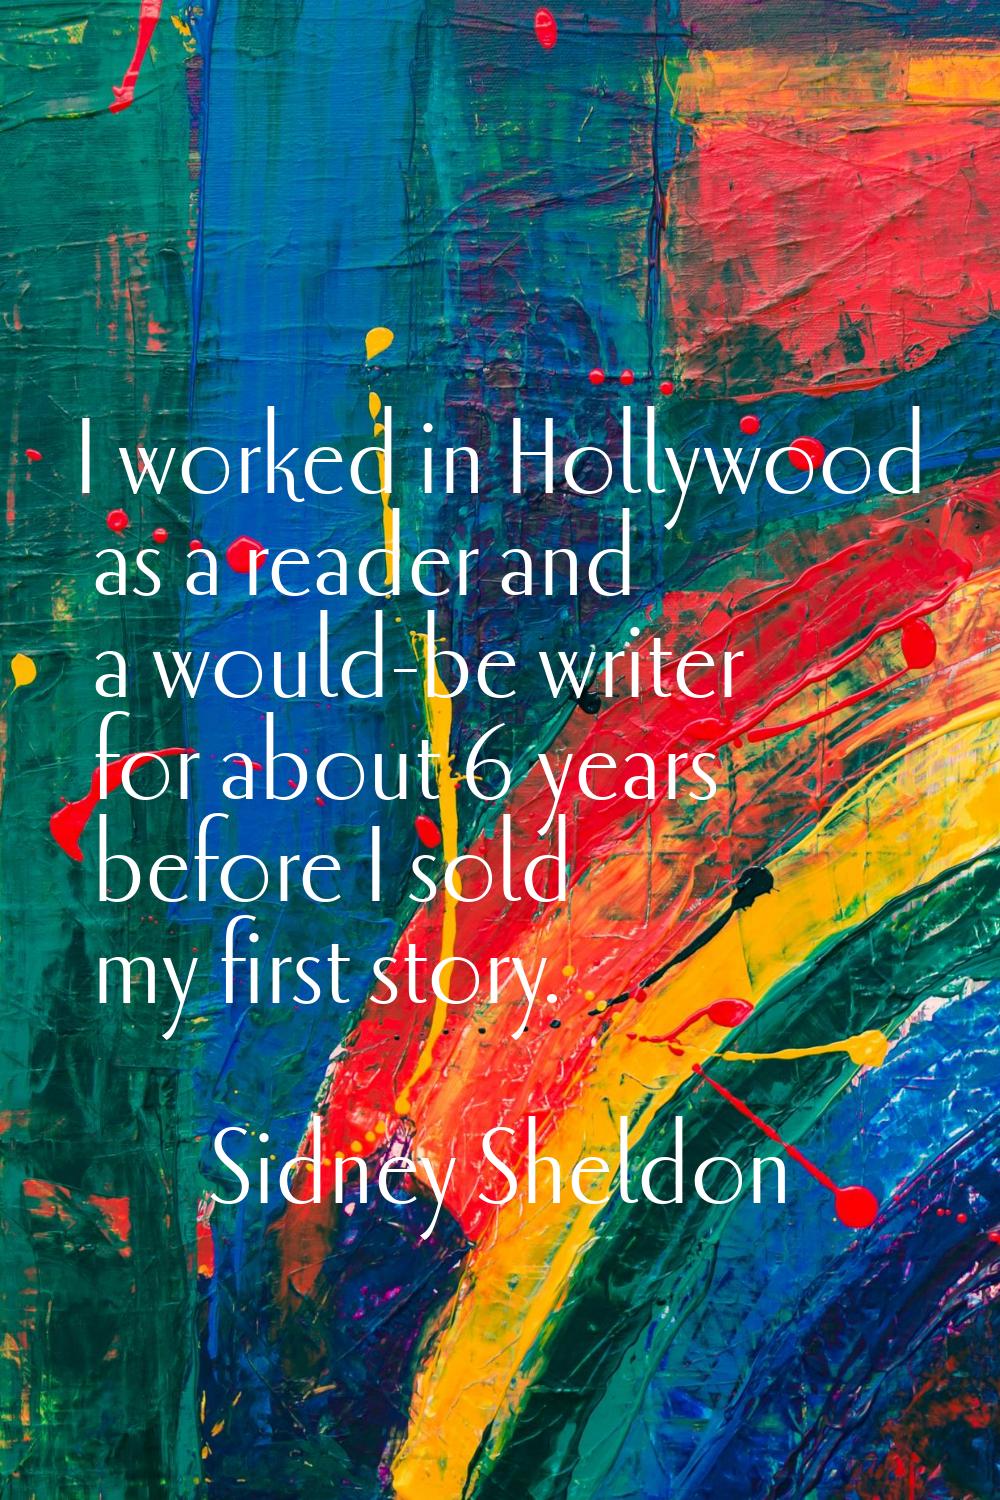 I worked in Hollywood as a reader and a would-be writer for about 6 years before I sold my first st